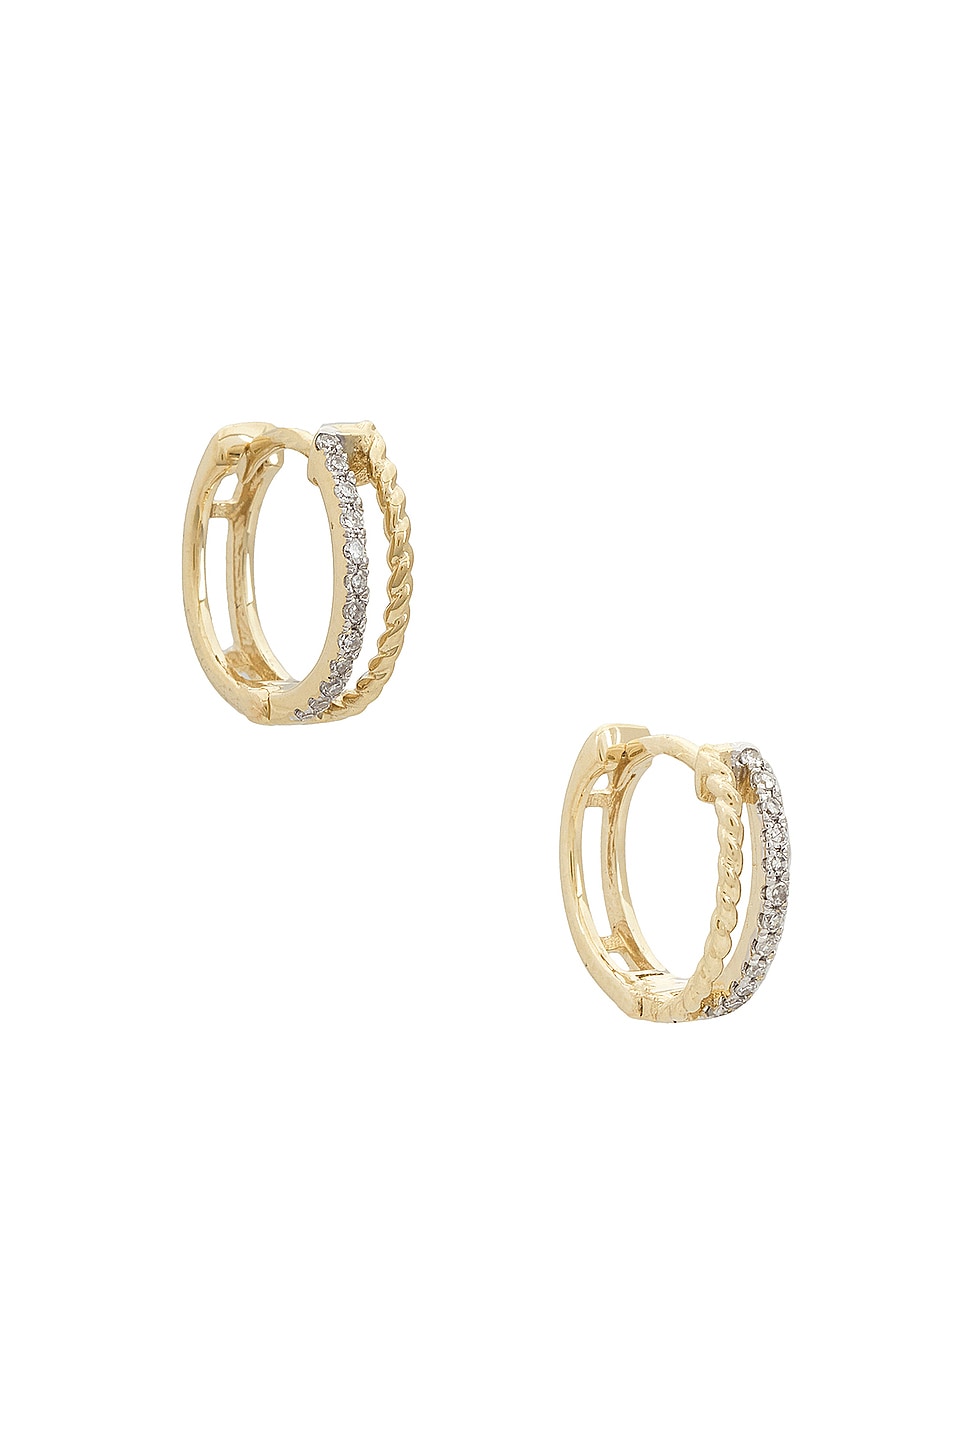 Image 1 of STONE AND STRAND Velvet Rope Pave Second Hole Huggies Earrings in 10k Yellow Gold & White Diamond